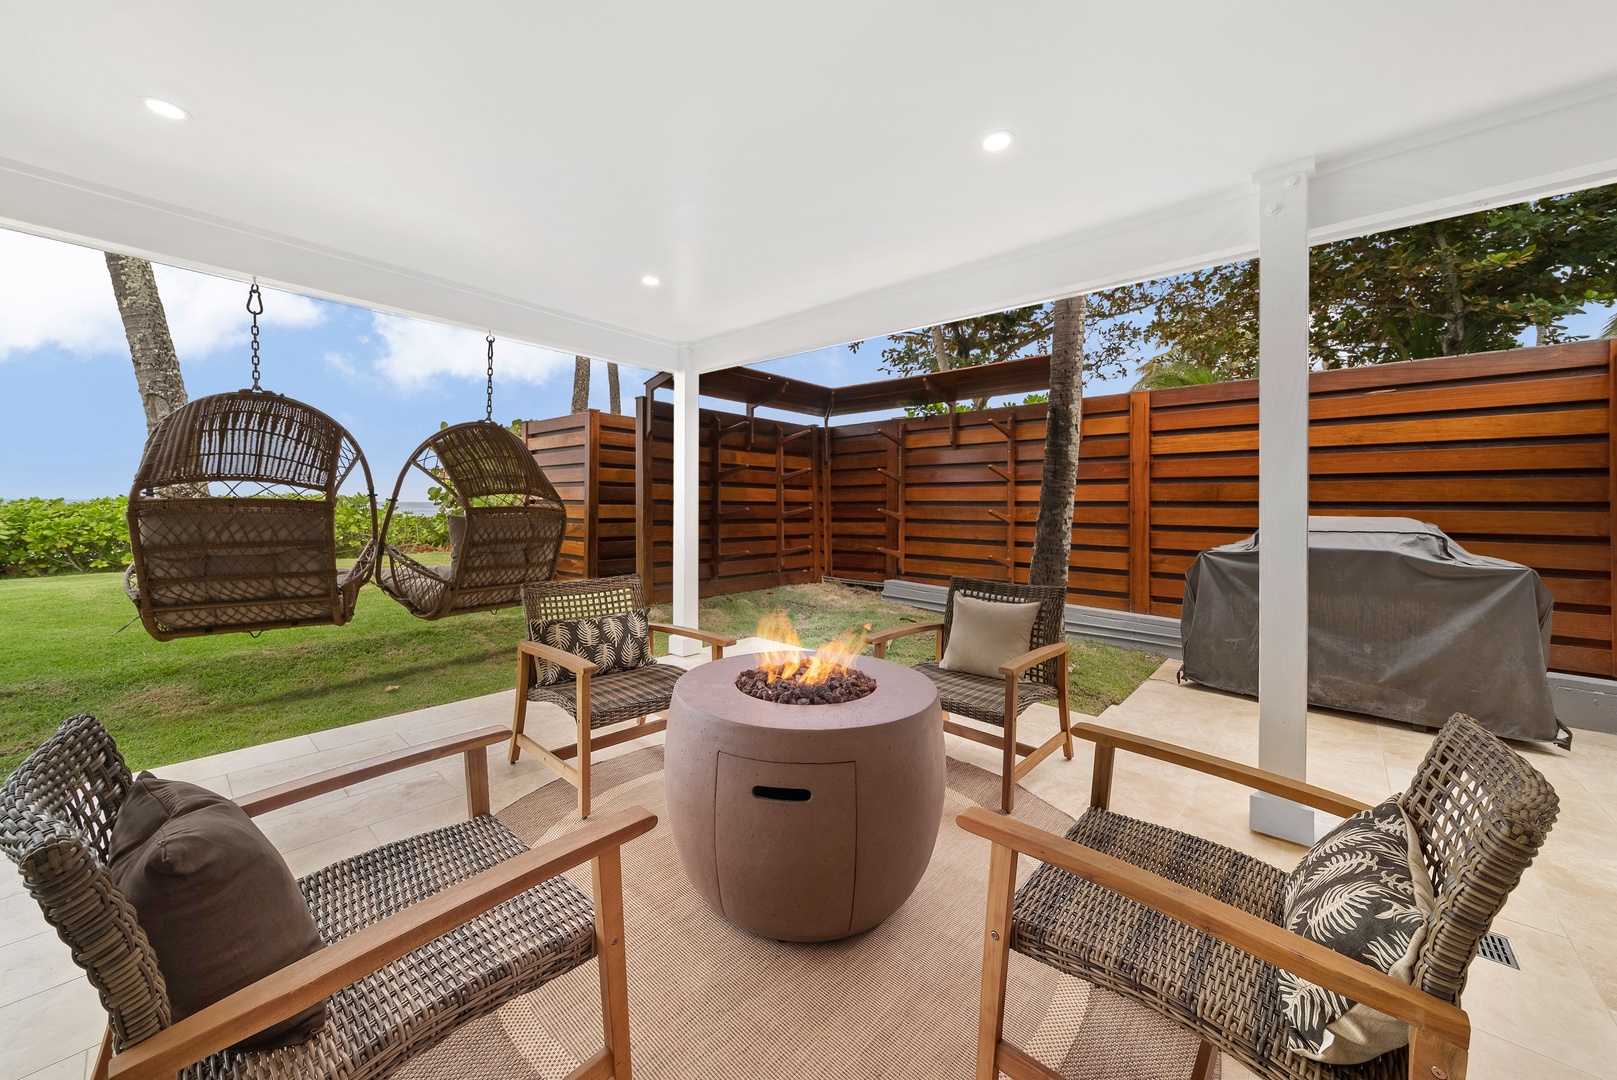 Haleiwa Vacation Rentals, Hale Nalu - Fire pit with covered lanai and outdoor furniture